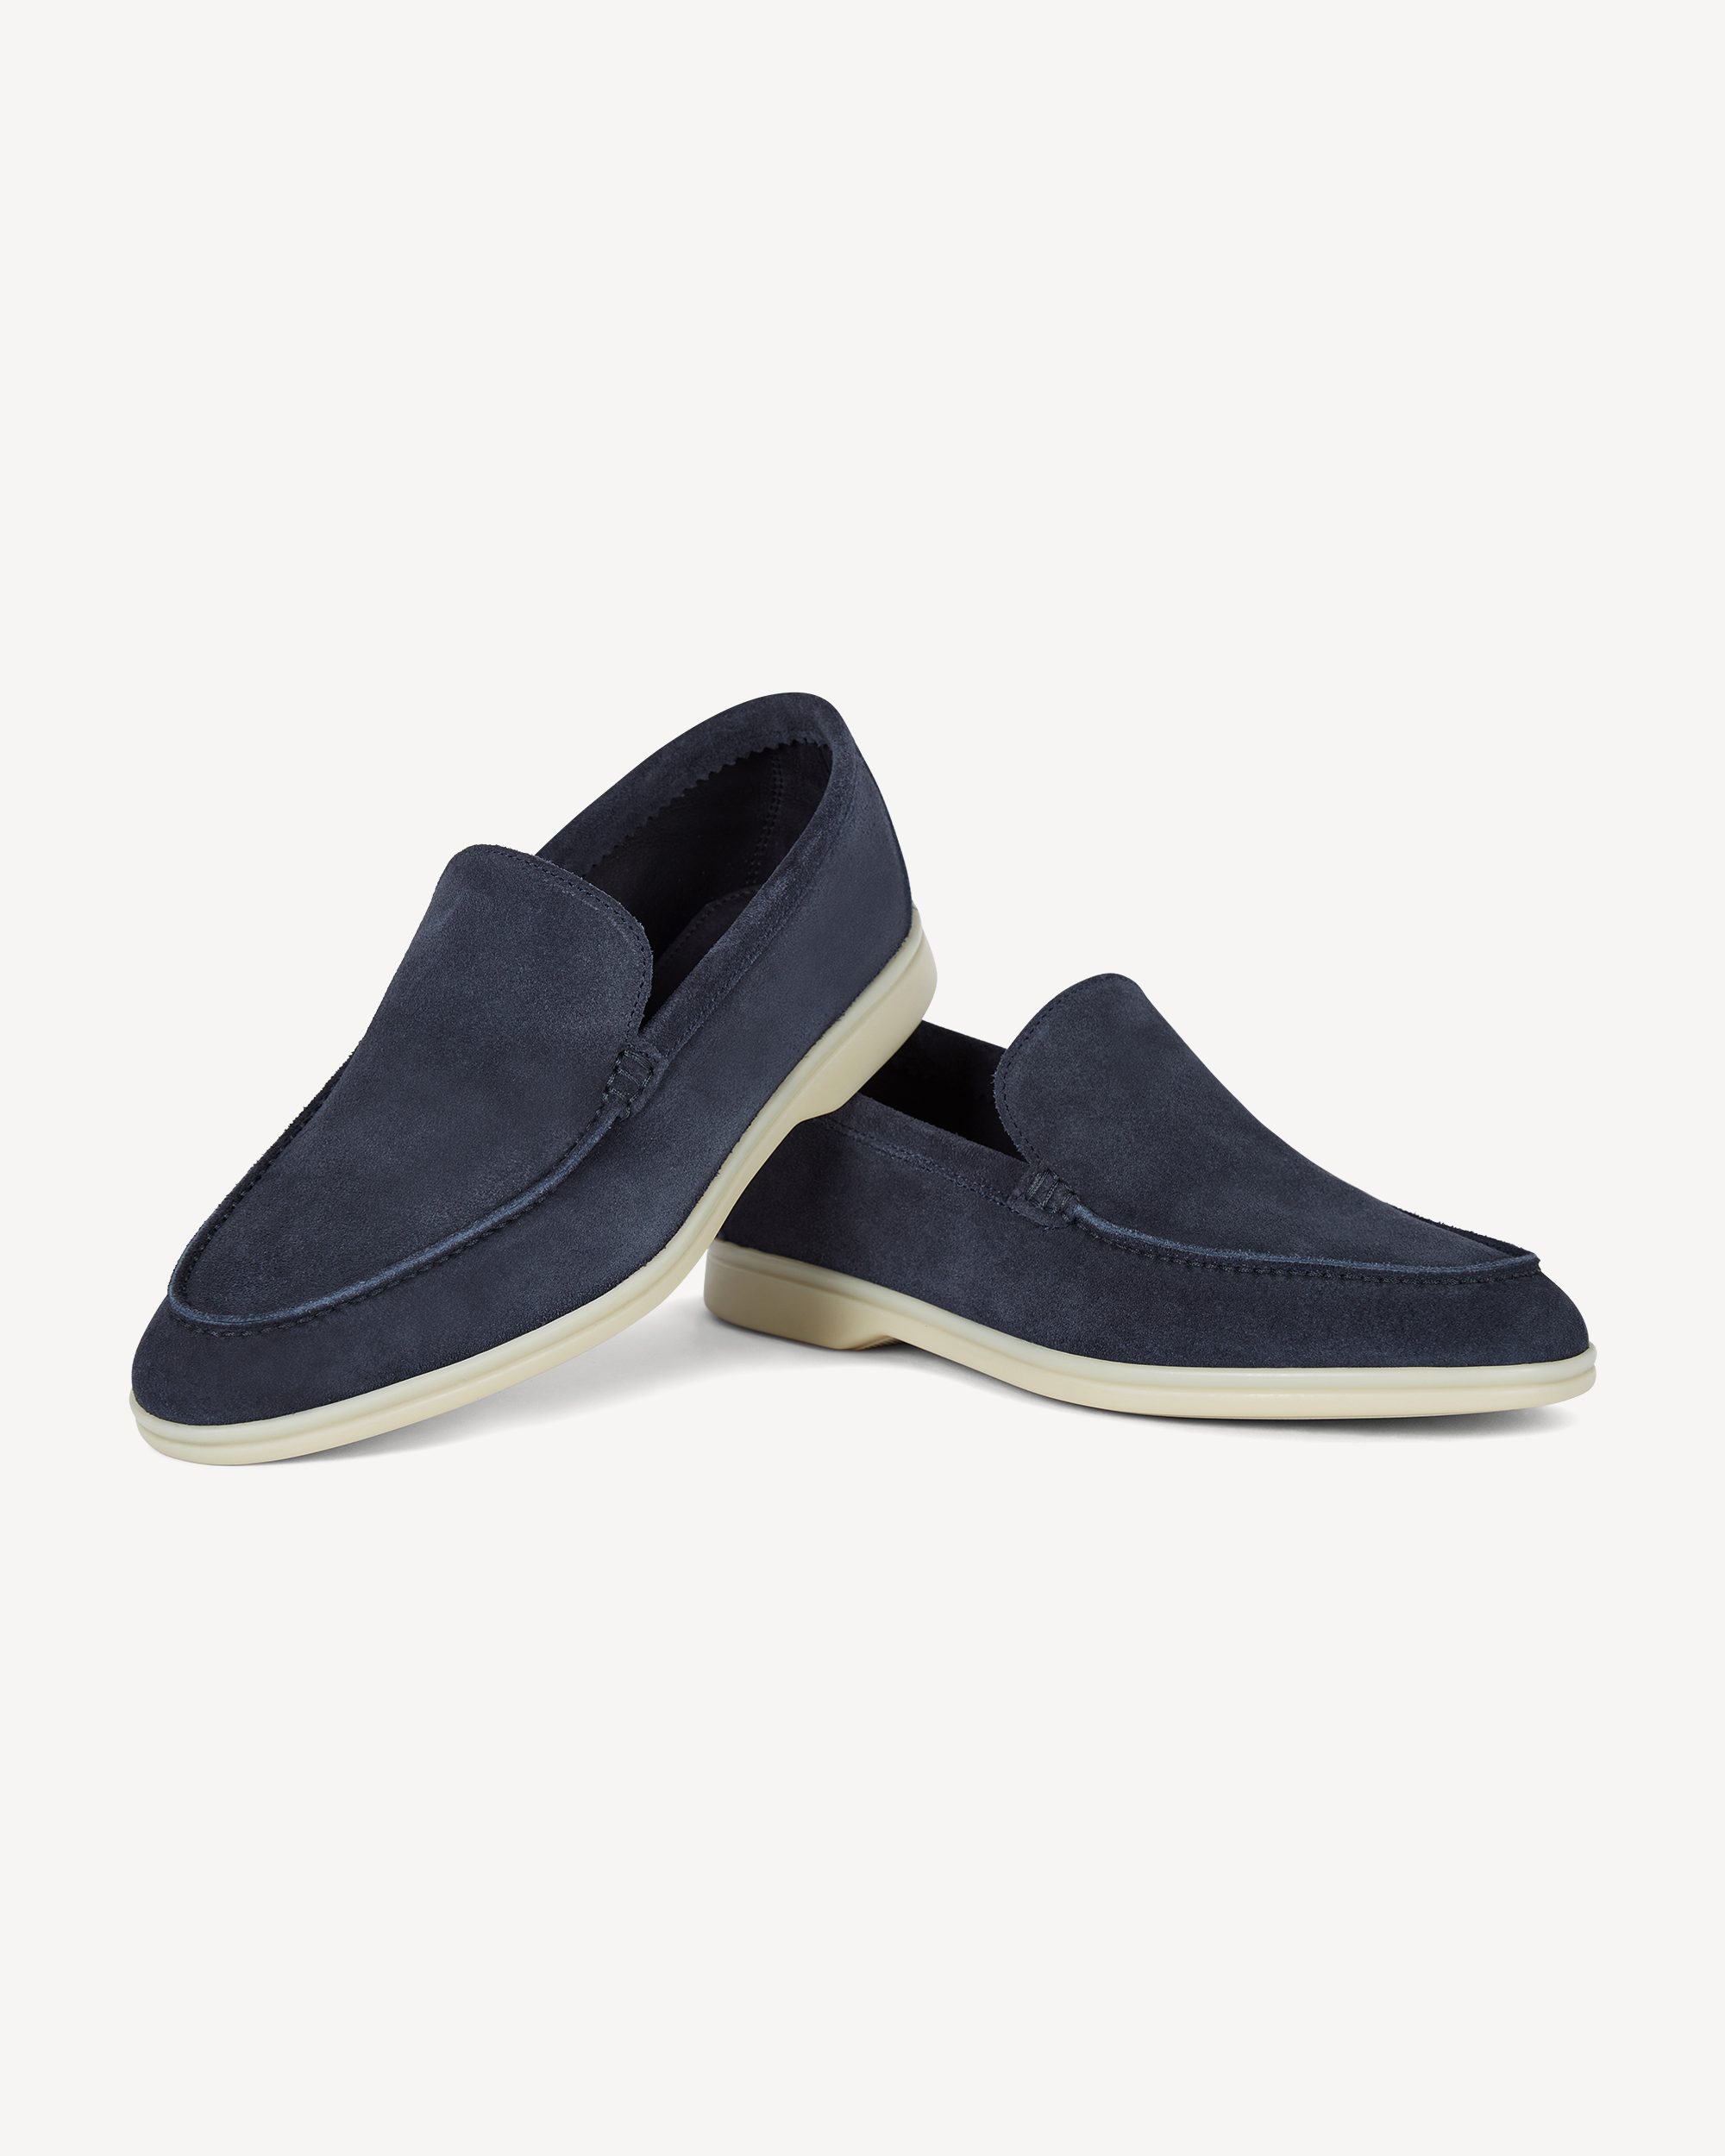 Henderson Loafers CAPRI suede online shopping 